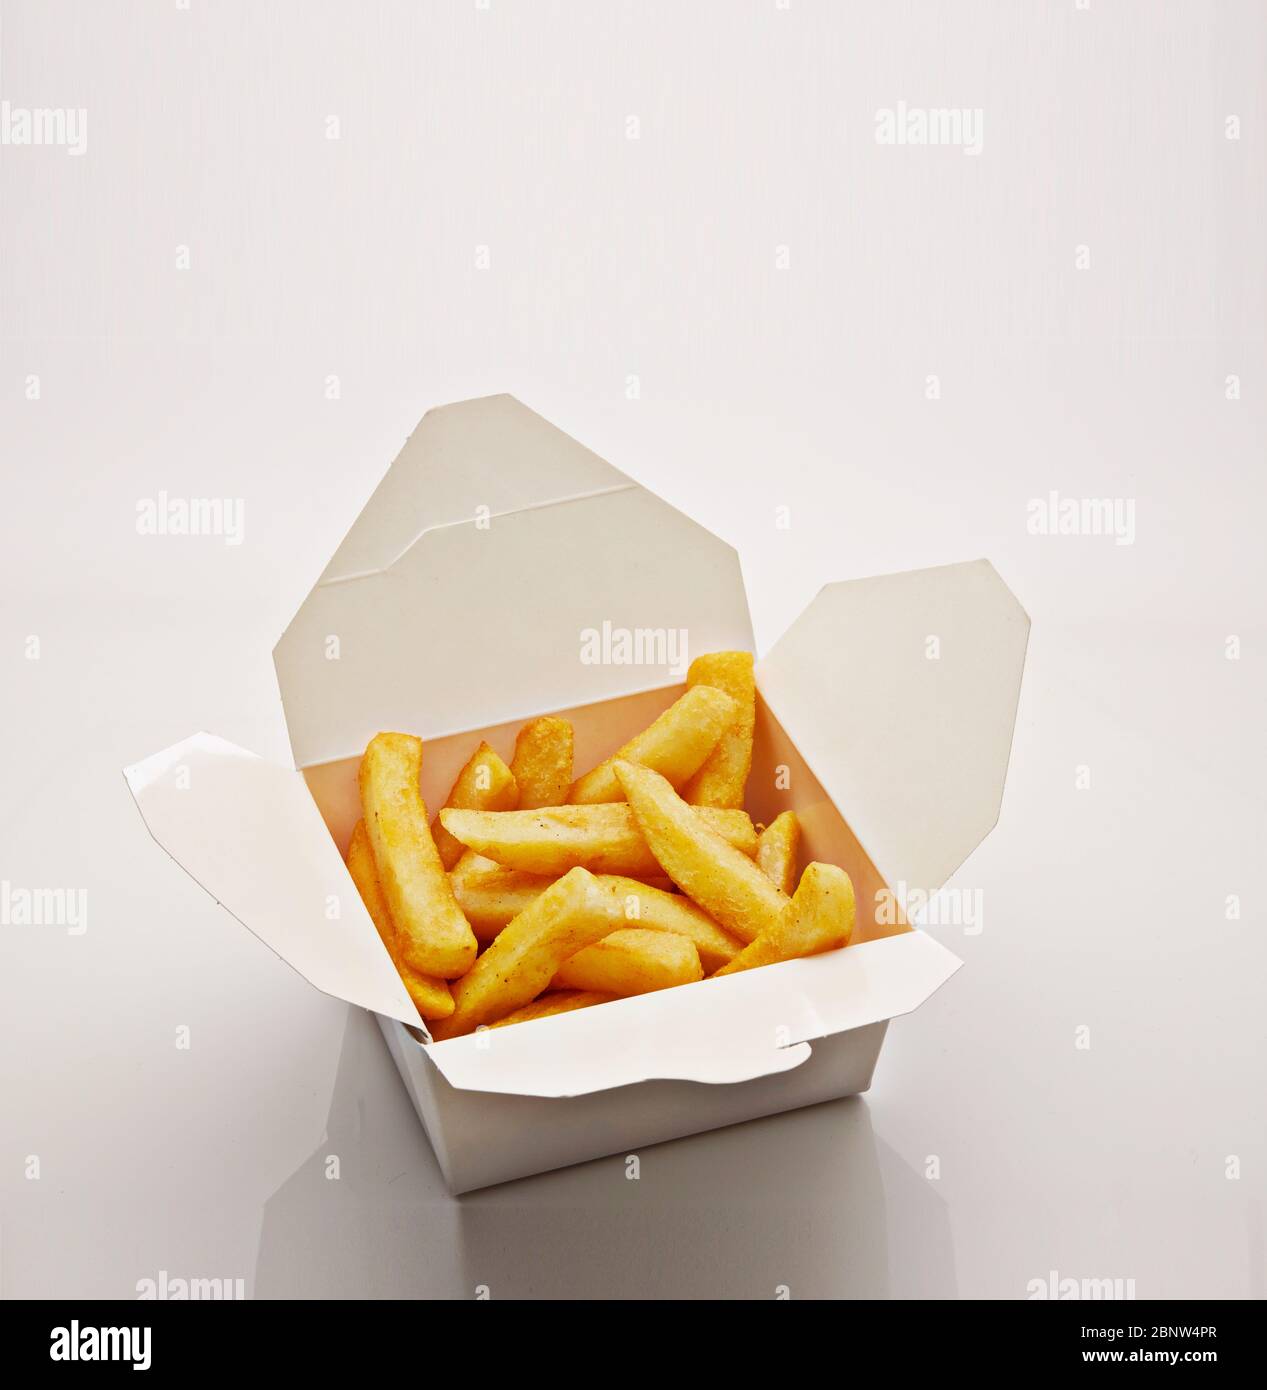 Shot of french fries served in paper box on white background Stock Photo